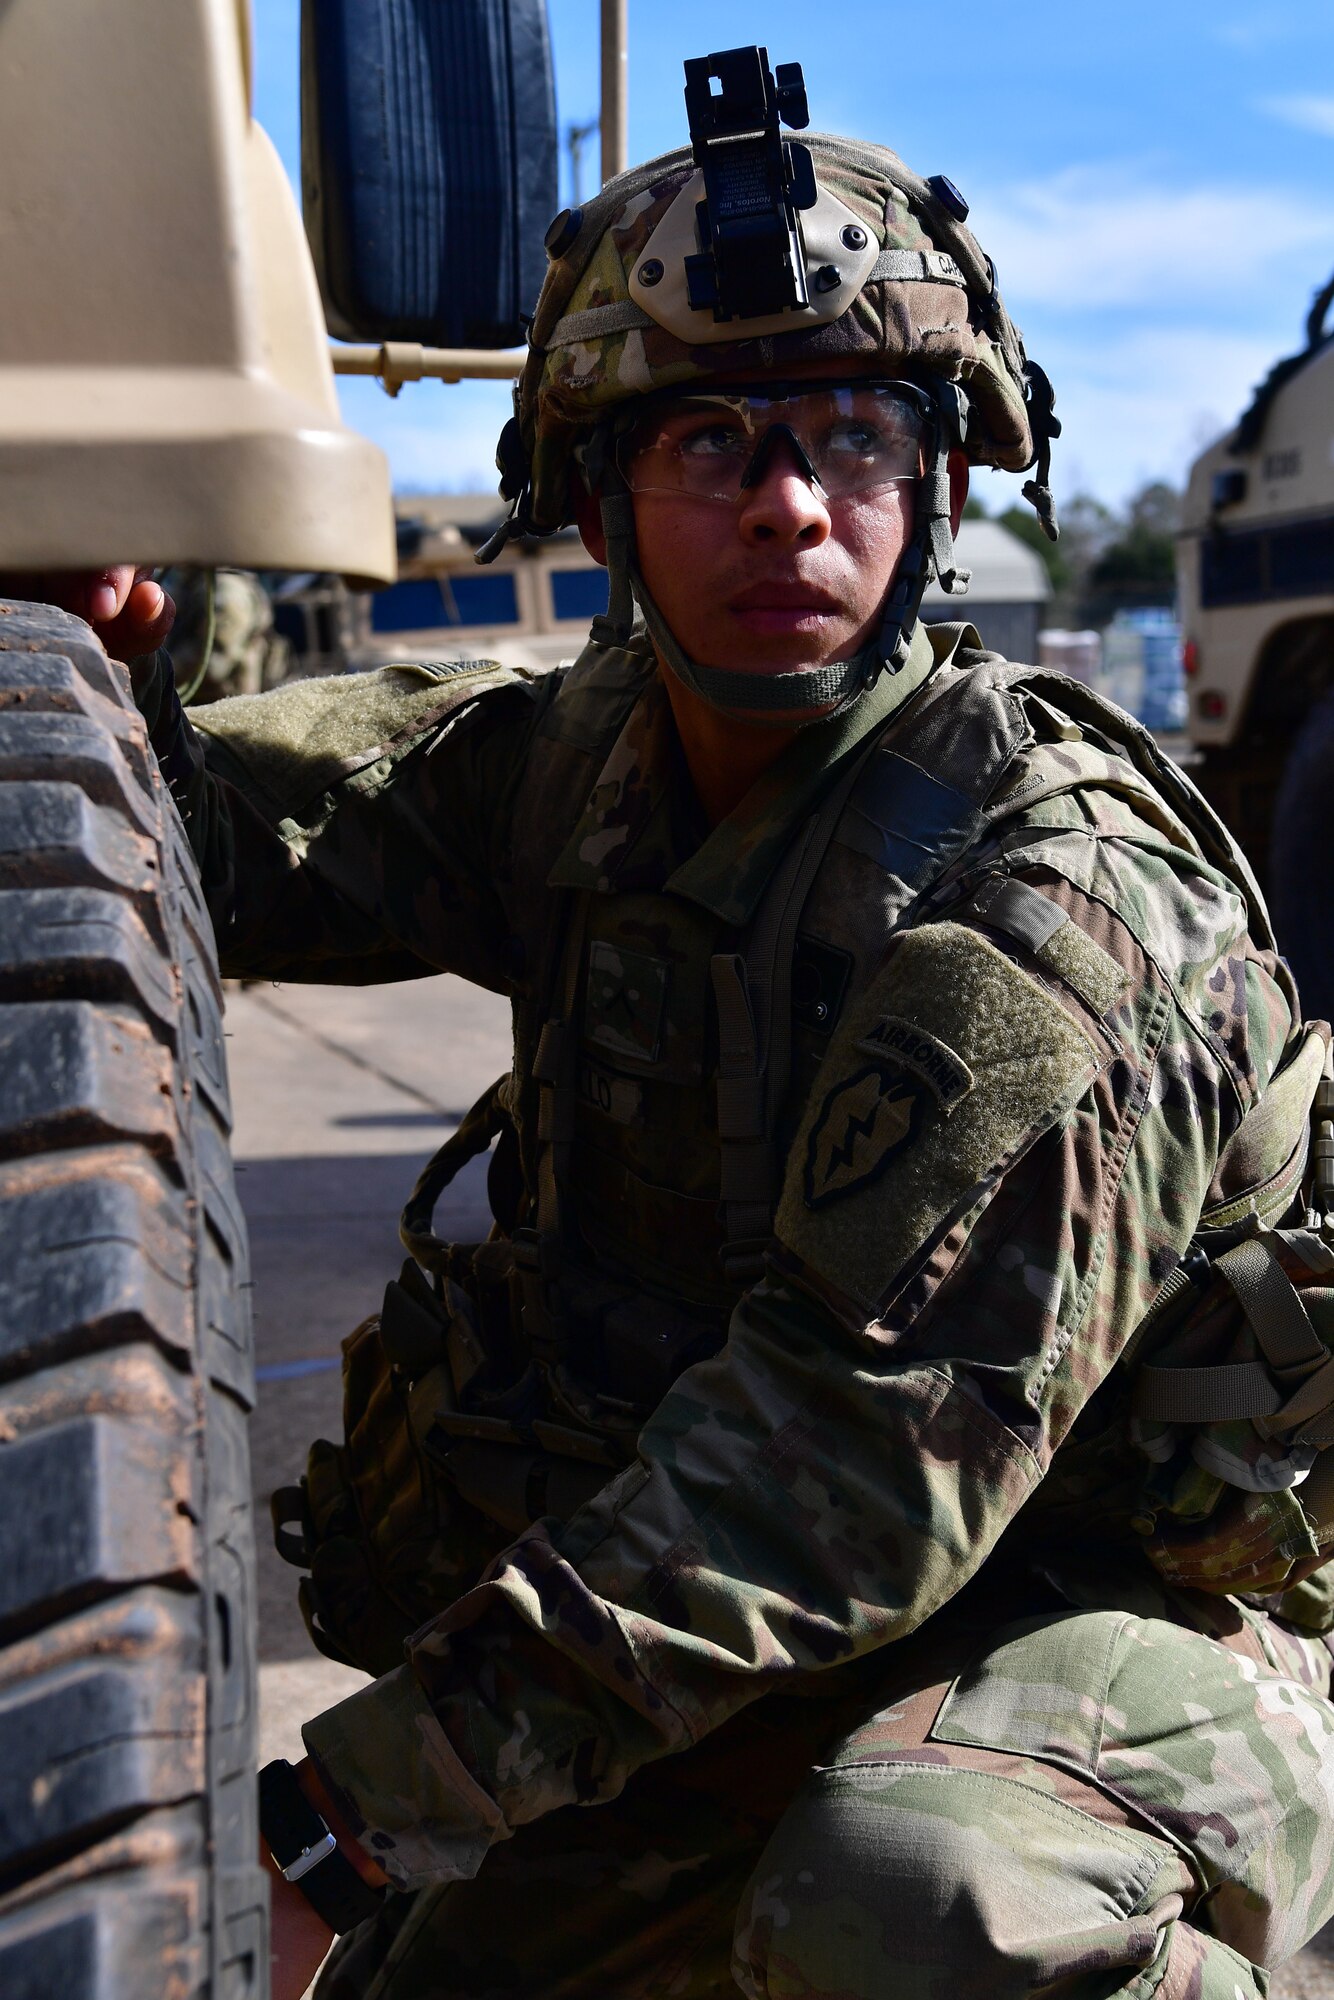 A soldier from the 4th Brigade Combat Team (Airborne), 25th Infantry Division, at Joint Base Elmendorf-Richardson, Alaska, checks the tire pressure on a Humvee during Green Flag Little Rock 20-03.